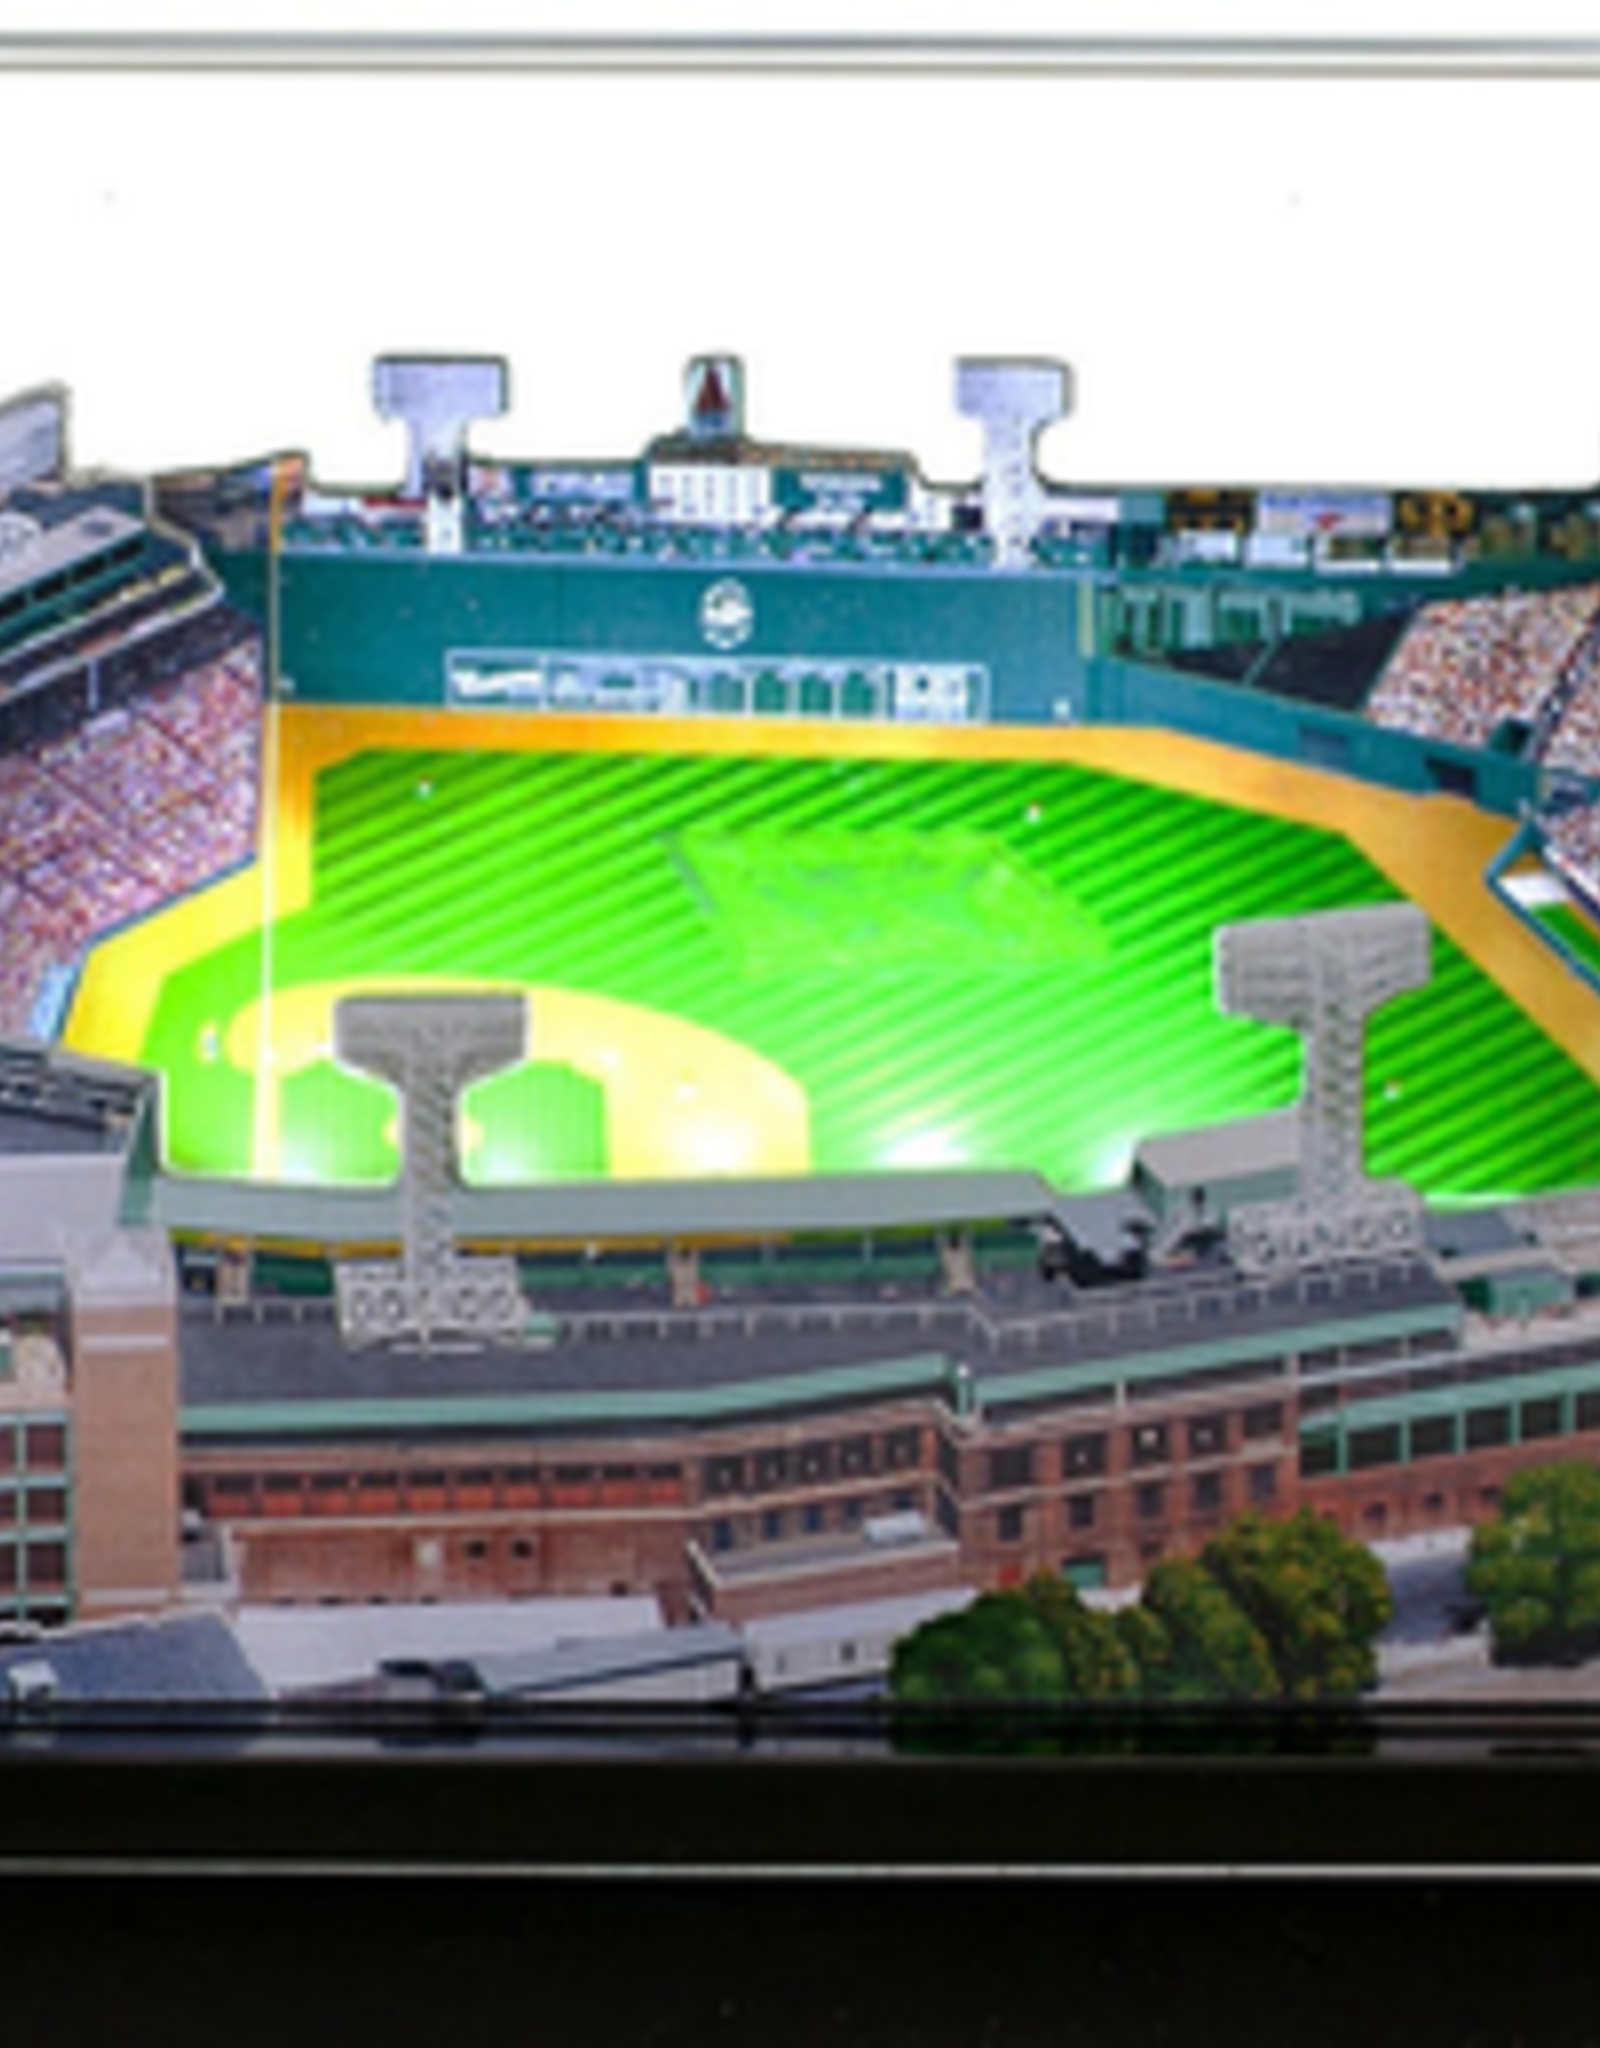 HOMEFIELDS Red Sox HomeField - Fenway Park 9IN